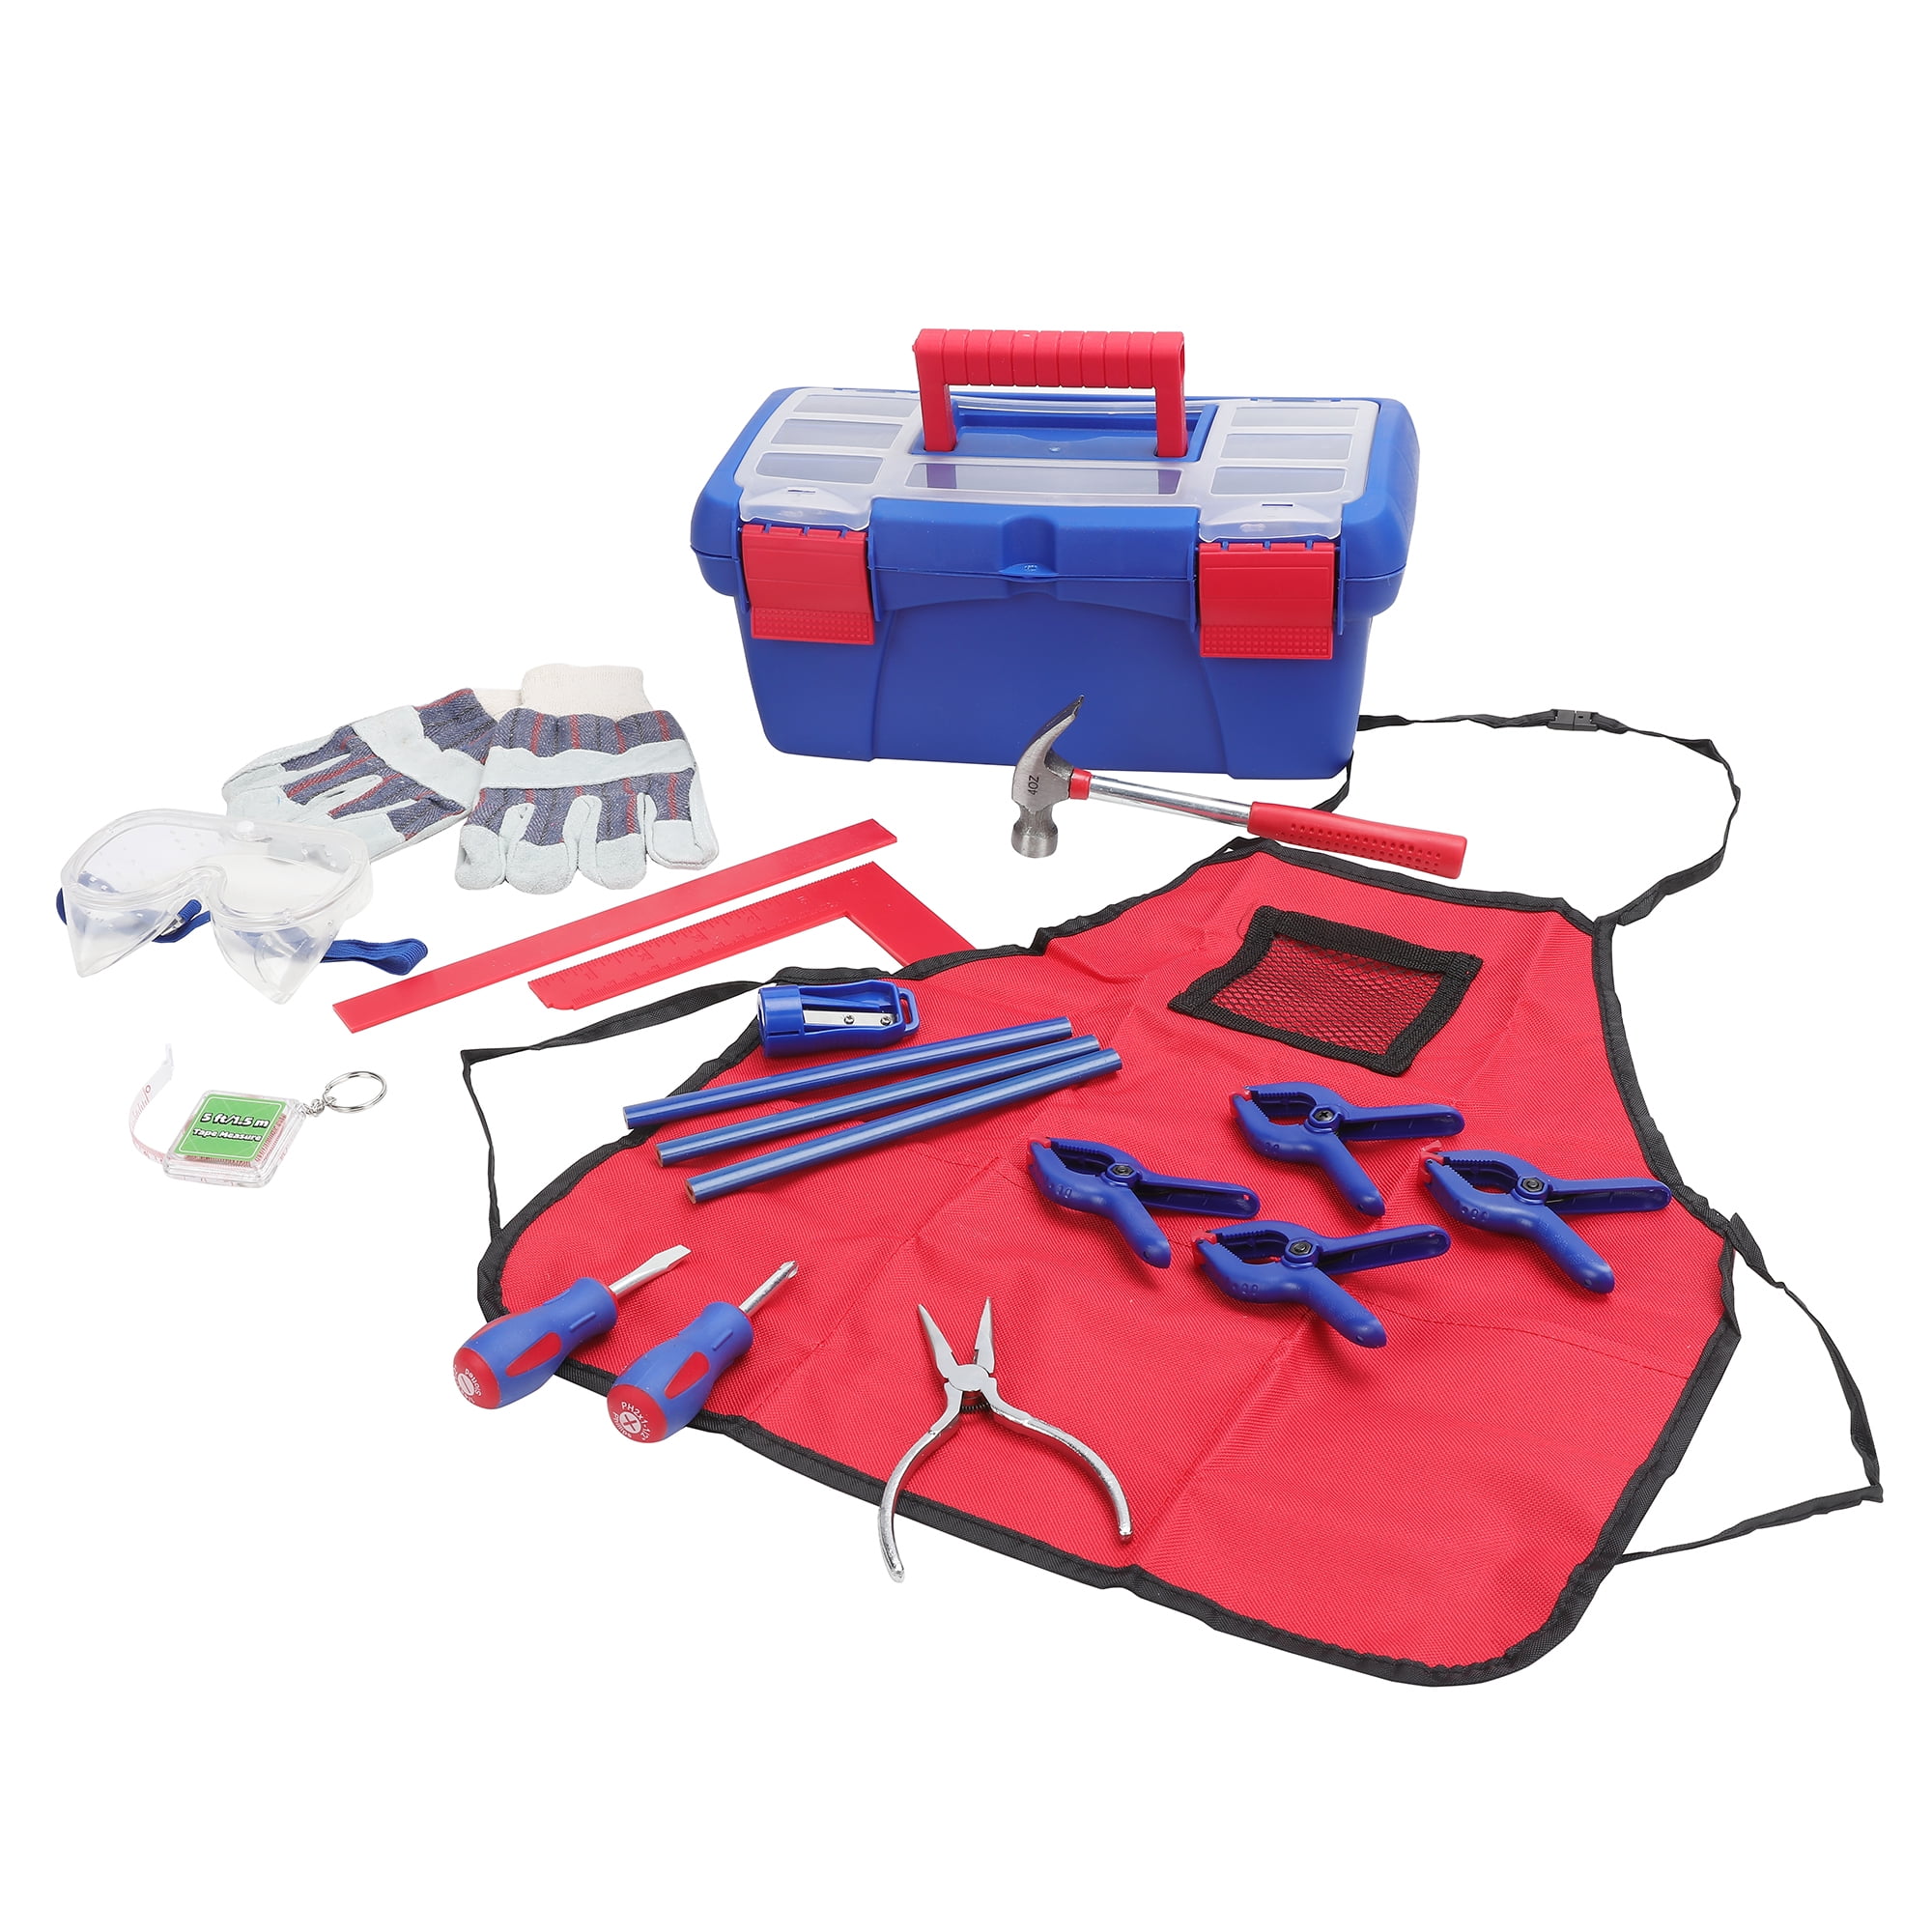 Create & Learn 18-Piece Tool Set with Toolbox, Apron, Gloves and Real Tools